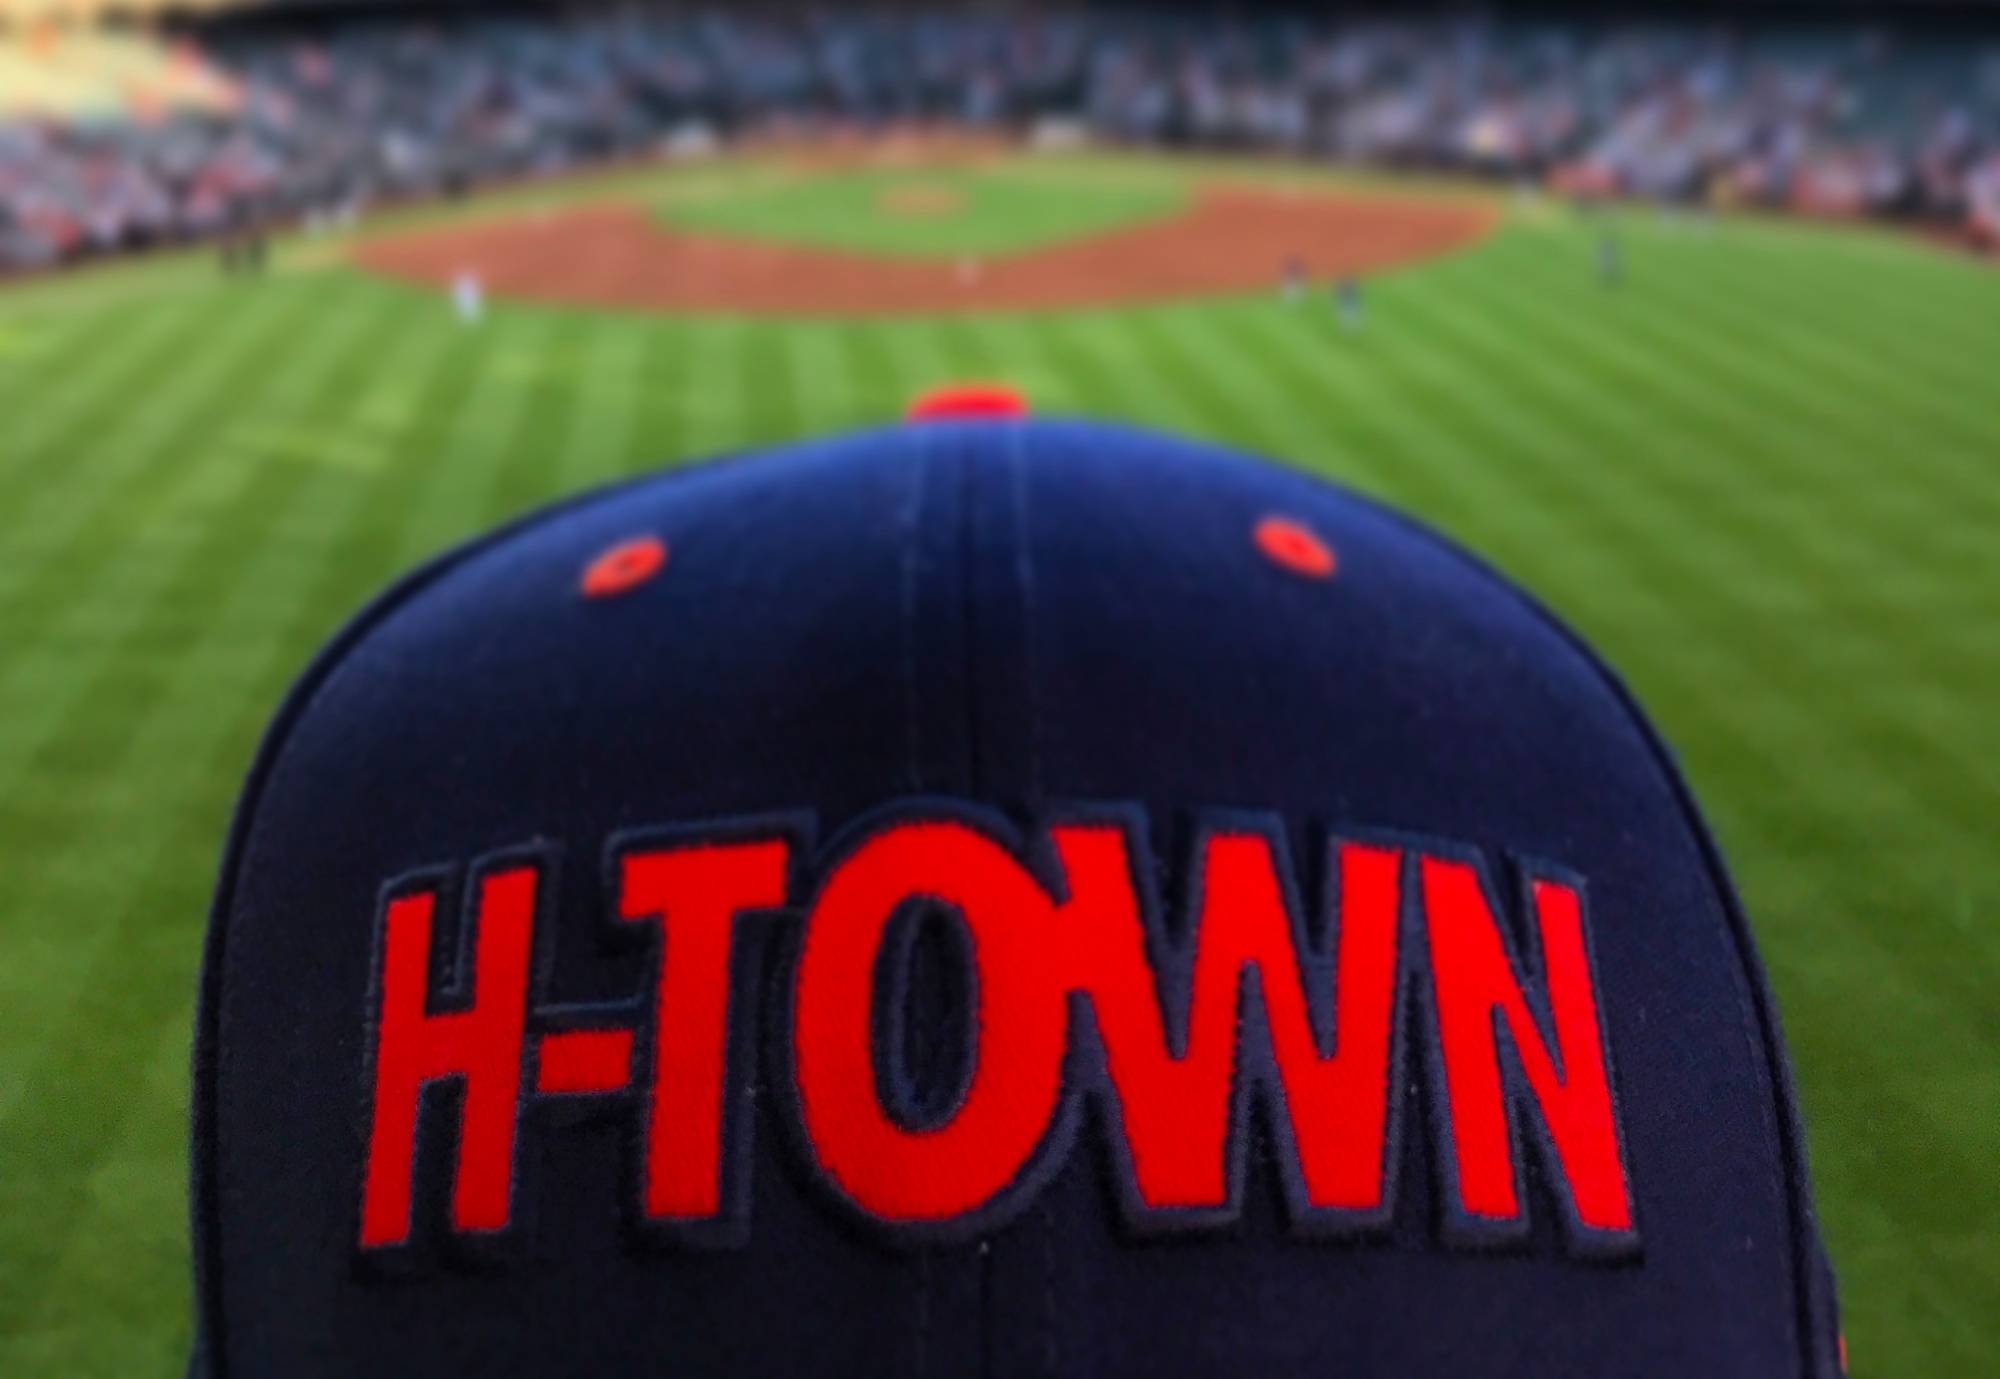 A blue hat with orange block letters reading "H-TOWN" sits in center field of a baseball stadium.